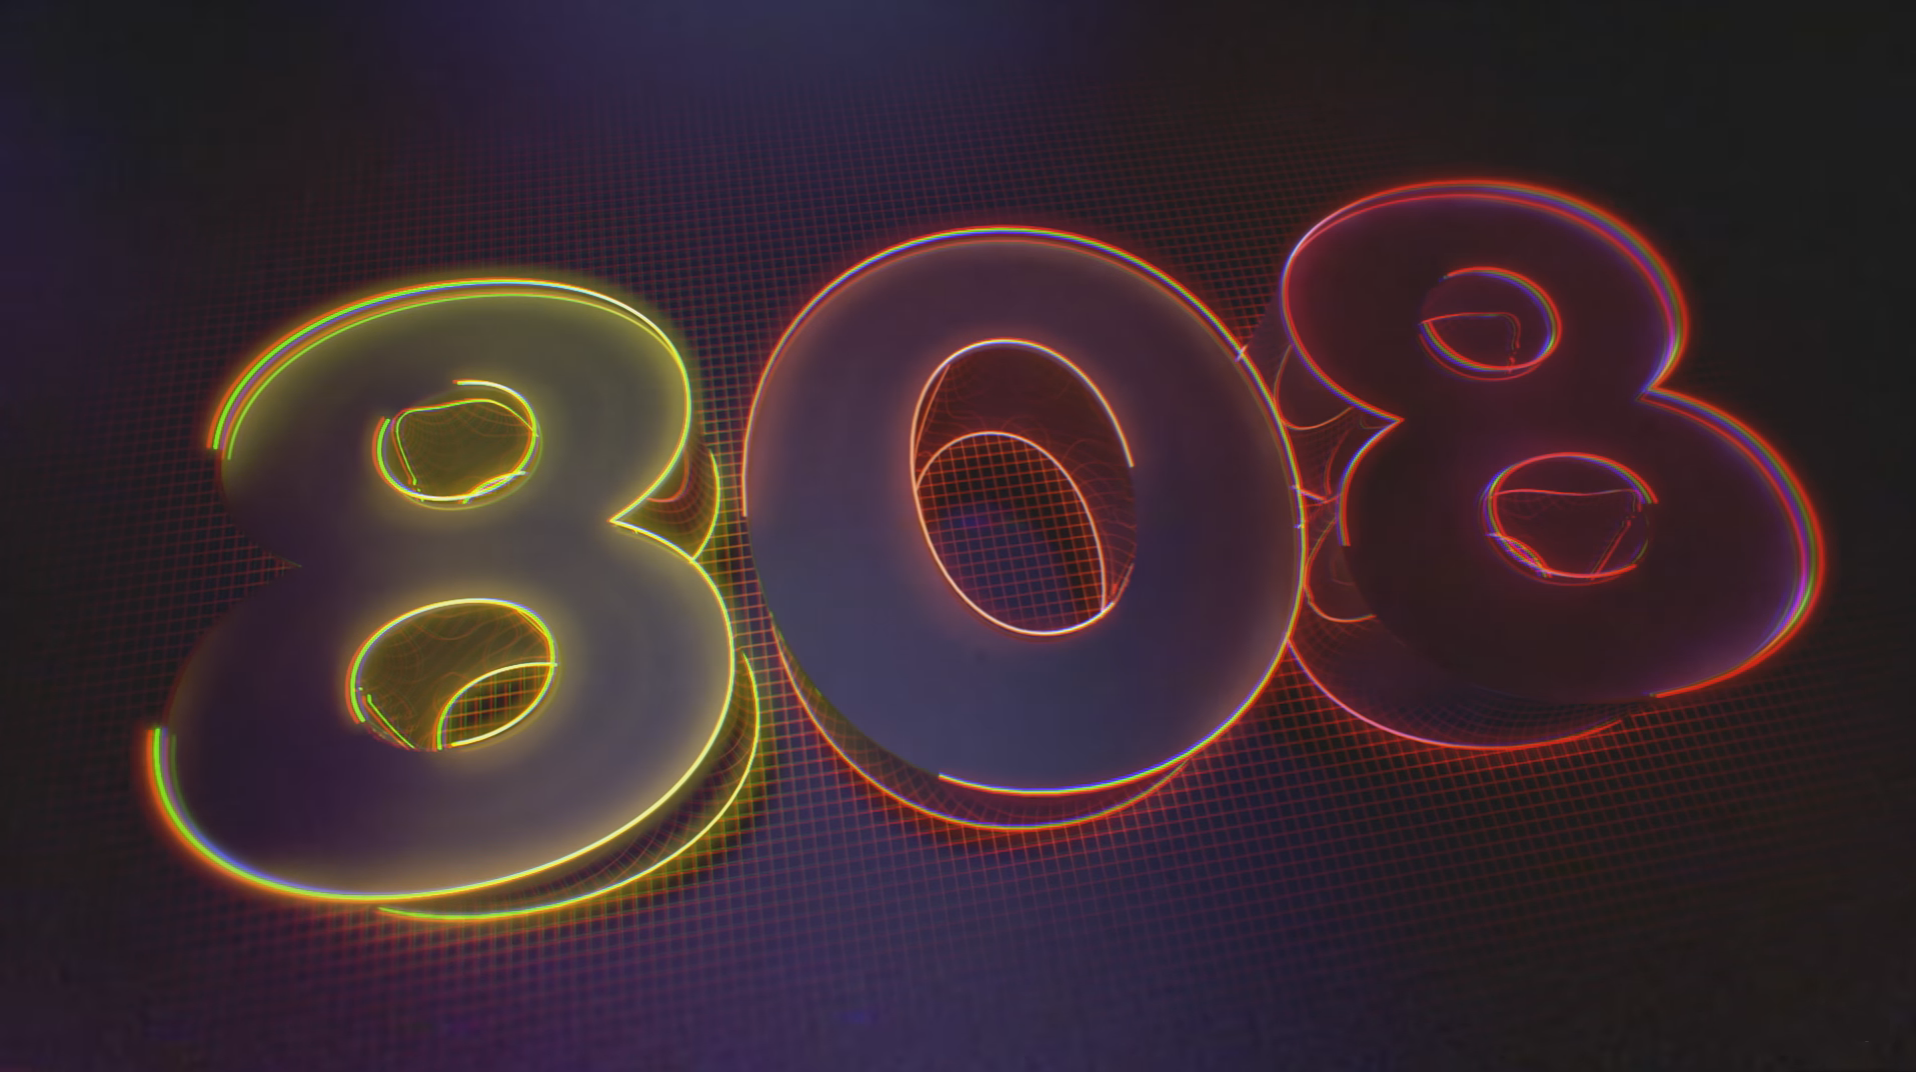 Discover the legacy of Roland’s famous 808 drum machine in this Apple exclusive documentary